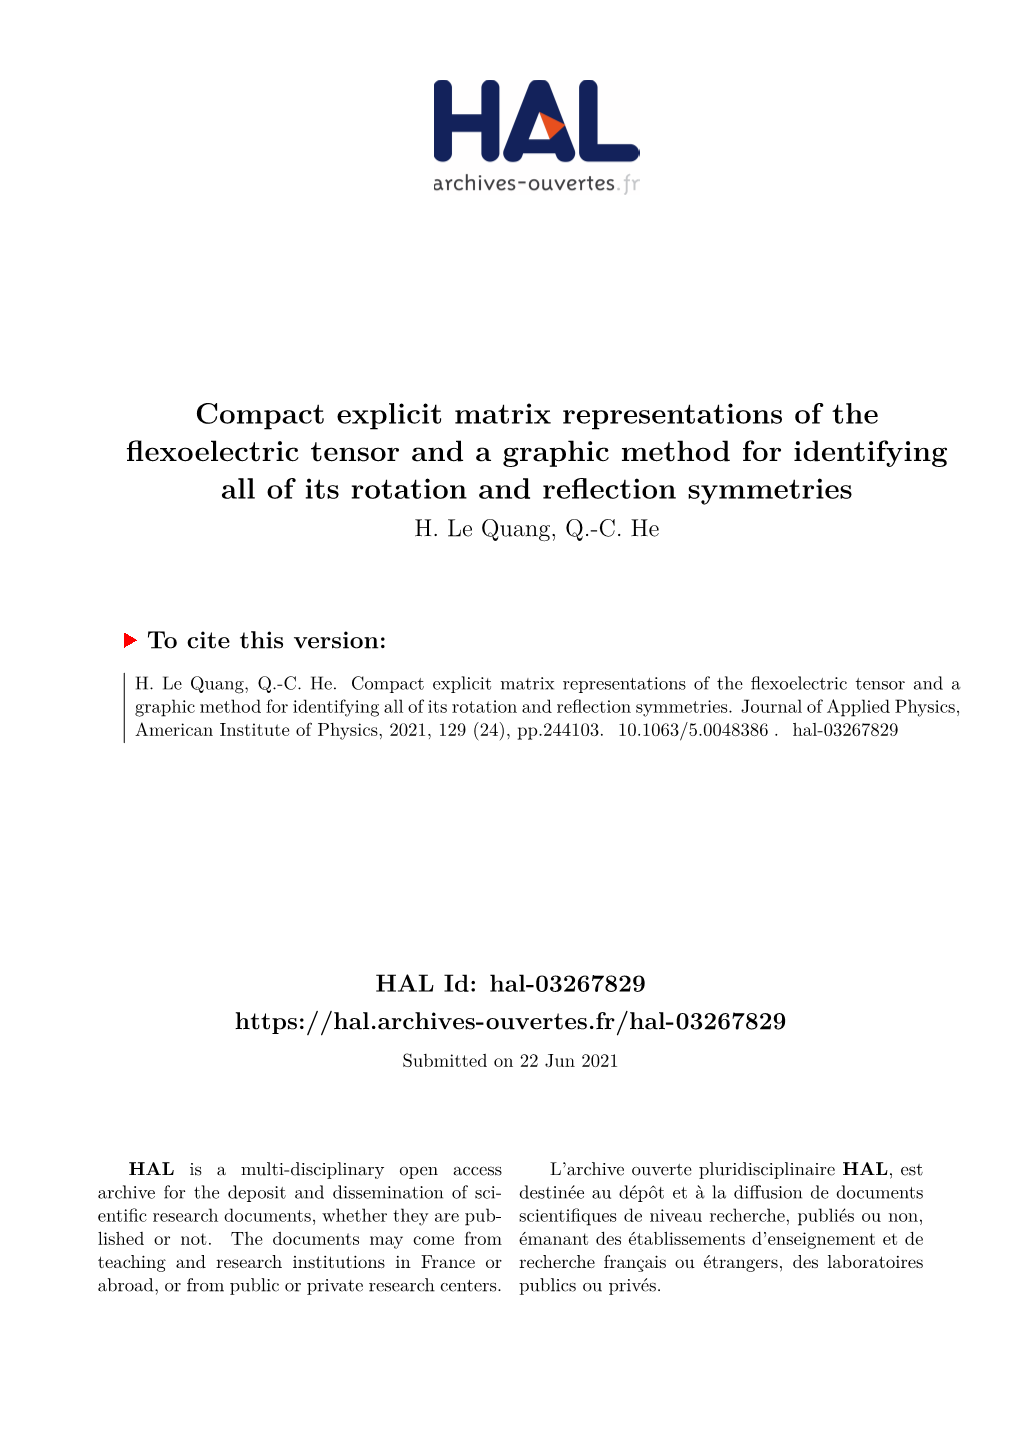 Compact Explicit Matrix Representations of the Flexoelectric Tensor and a Graphic Method for Identifying All of Its Rotation and Reflection Symmetries H